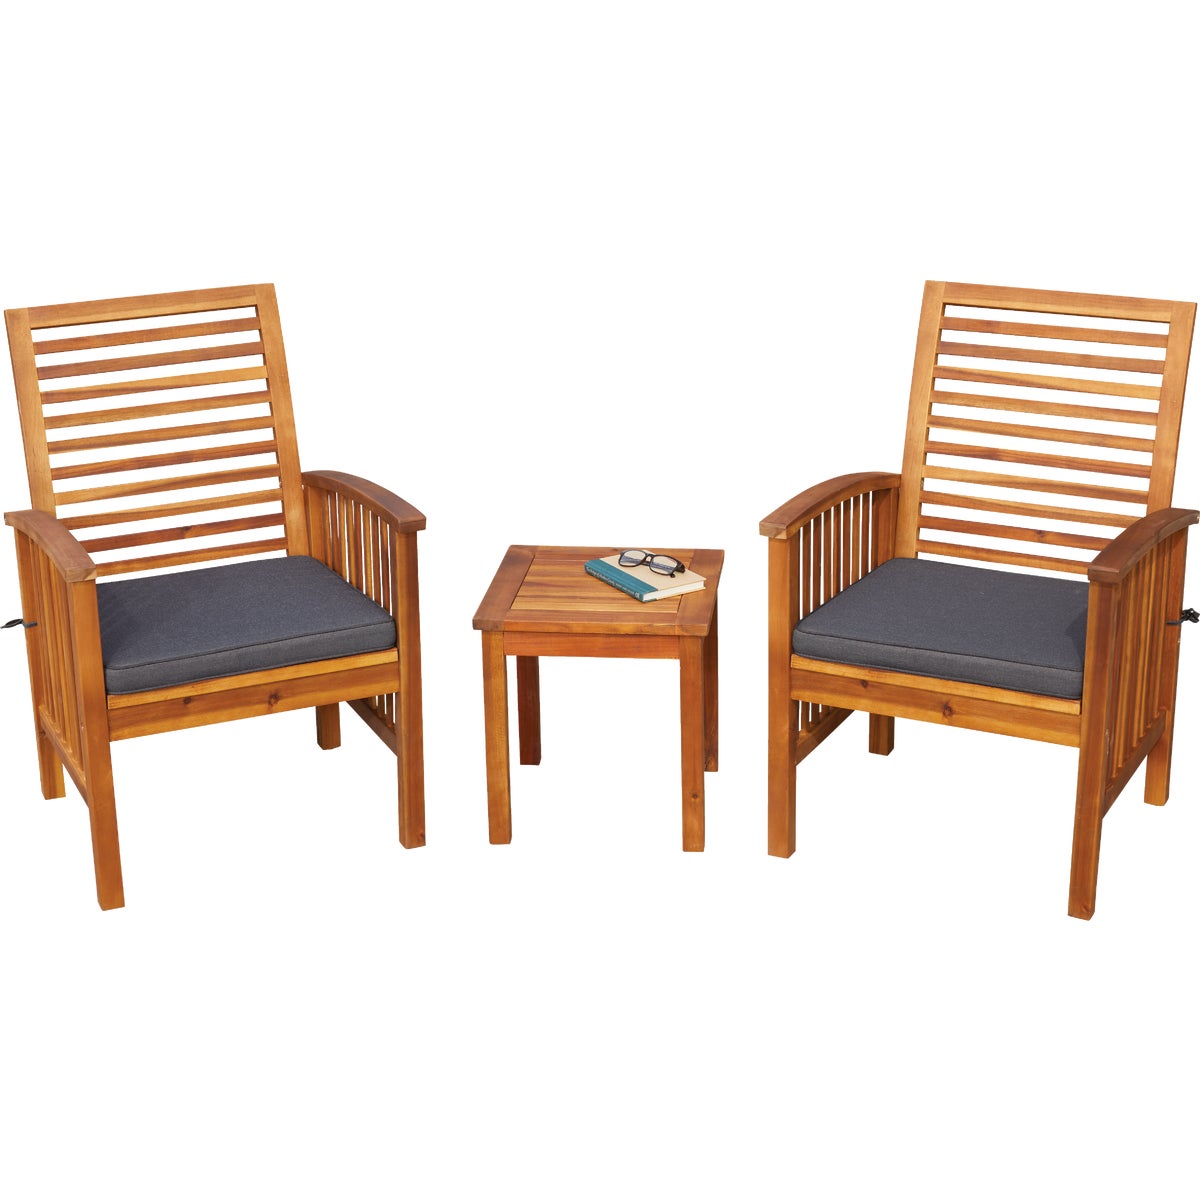 Leigh Country Sequoia Collection 3-Piece Patio Chat Set